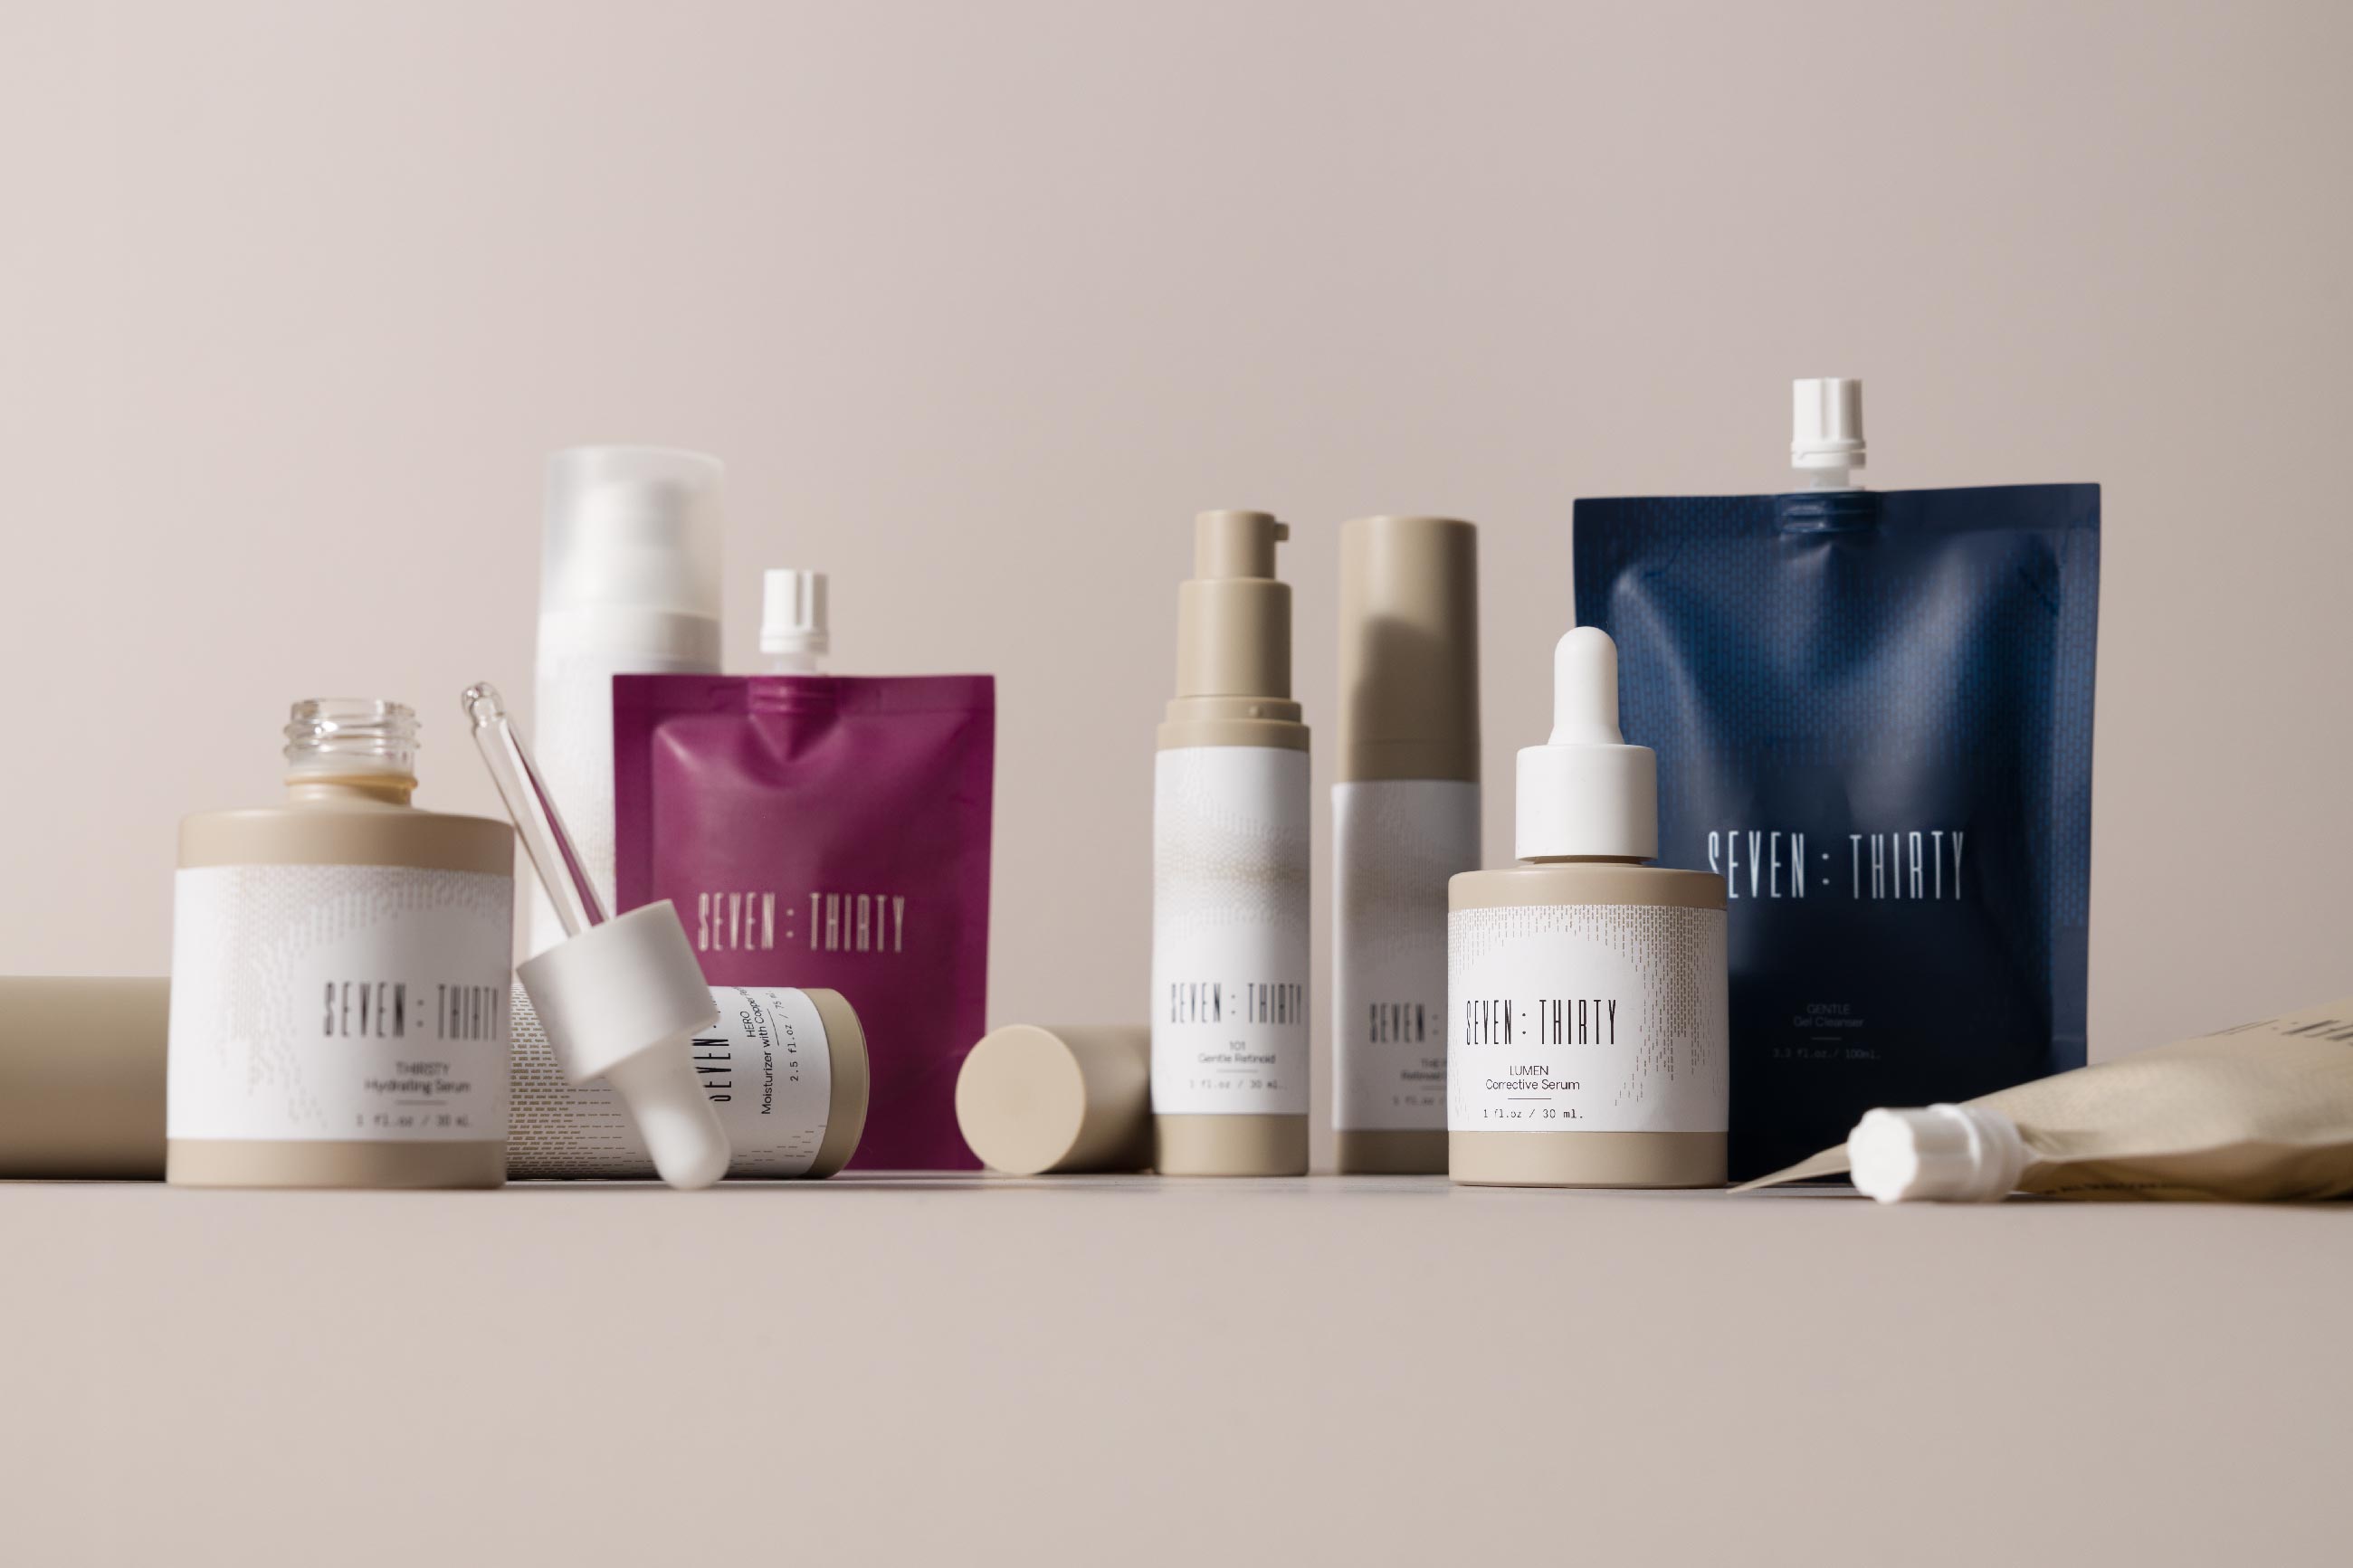 The full skincare line of products from Seven:Thirty arranged on a khaki background